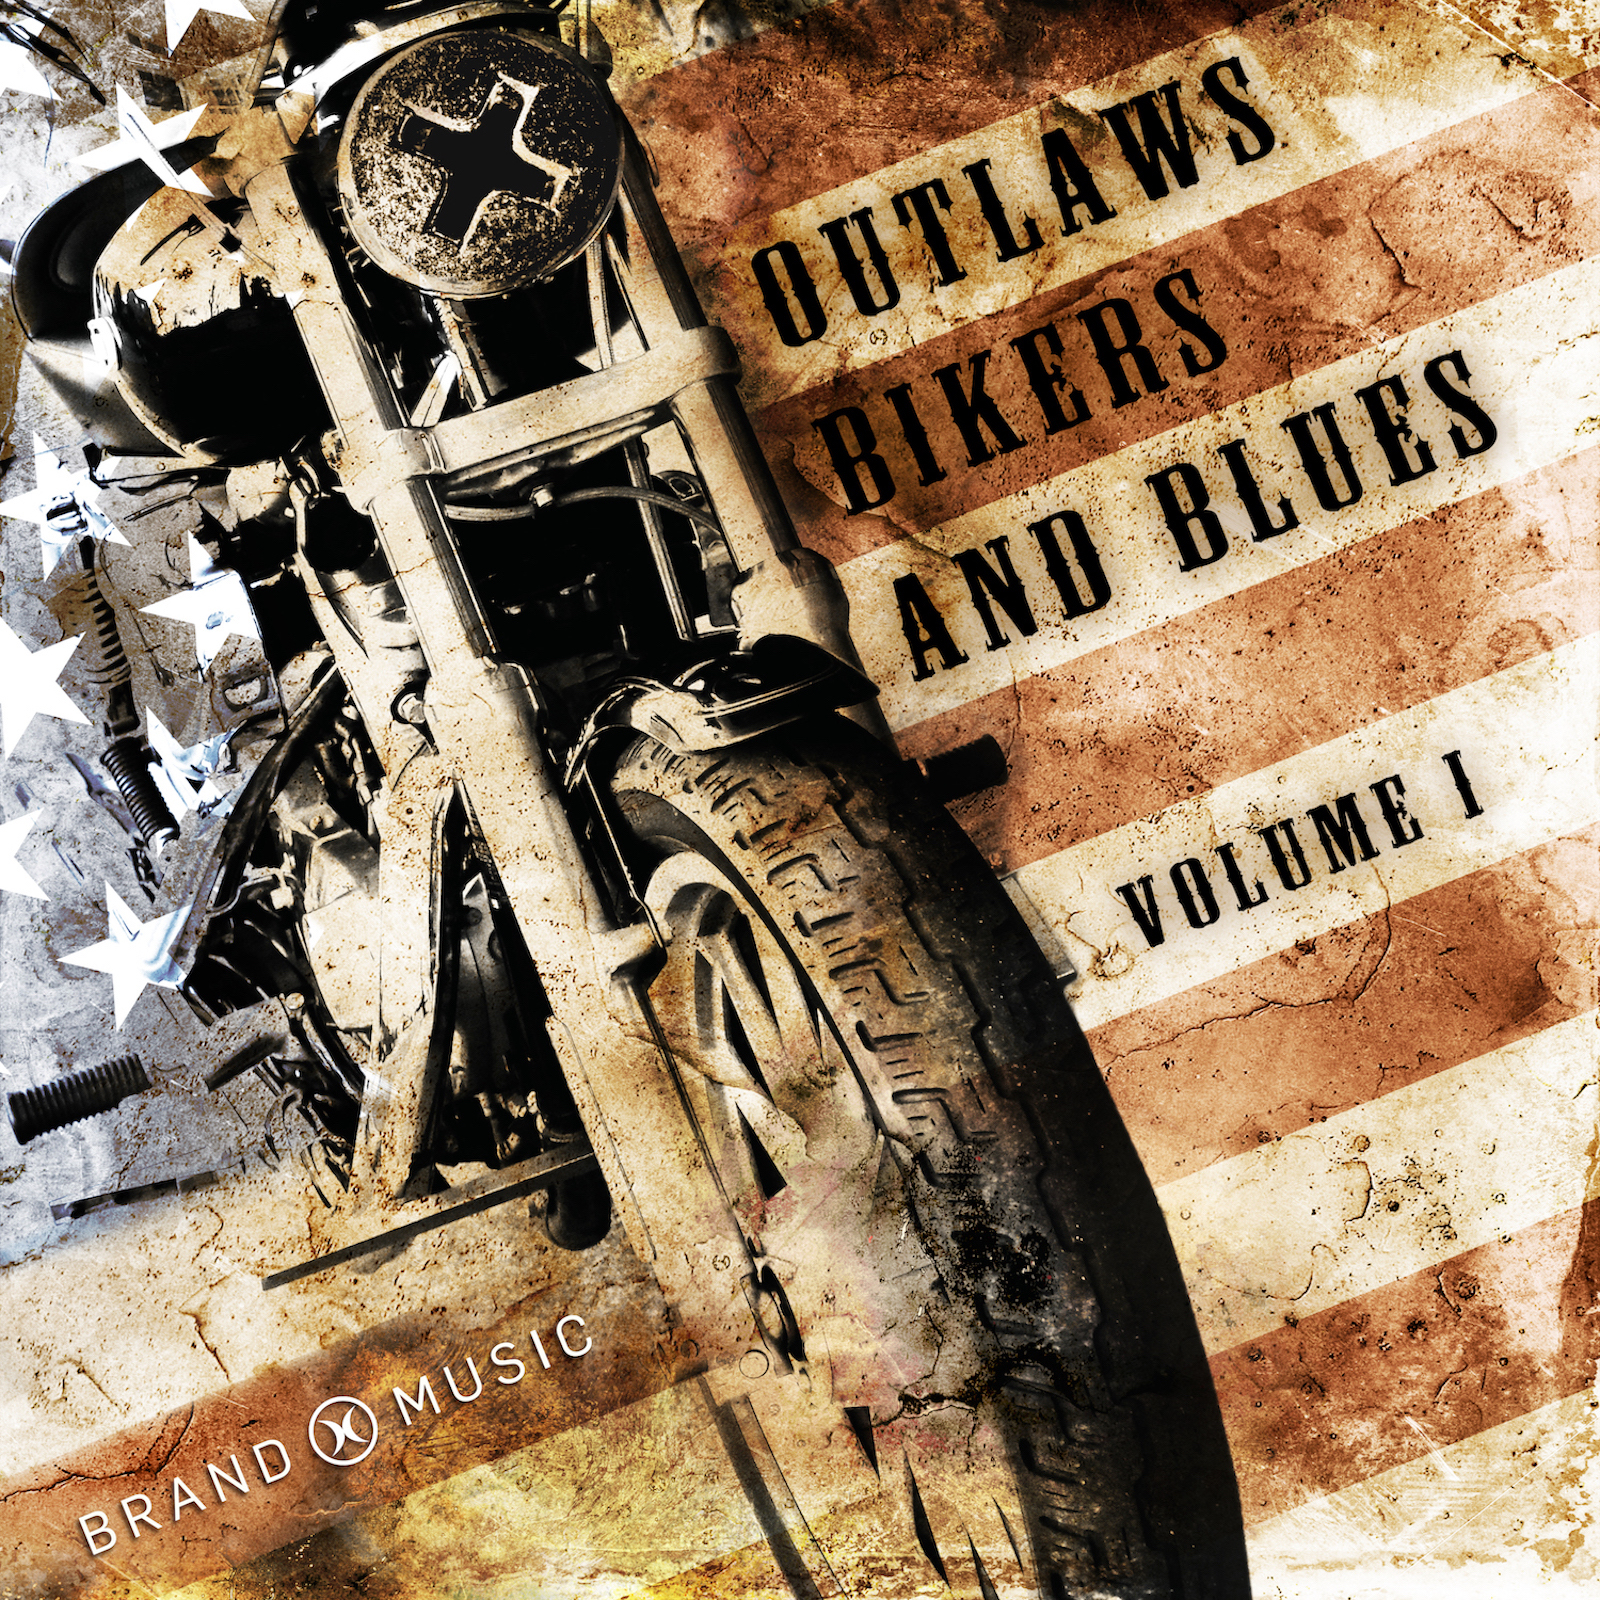 Outlaws Bikers and Blues Volume 1